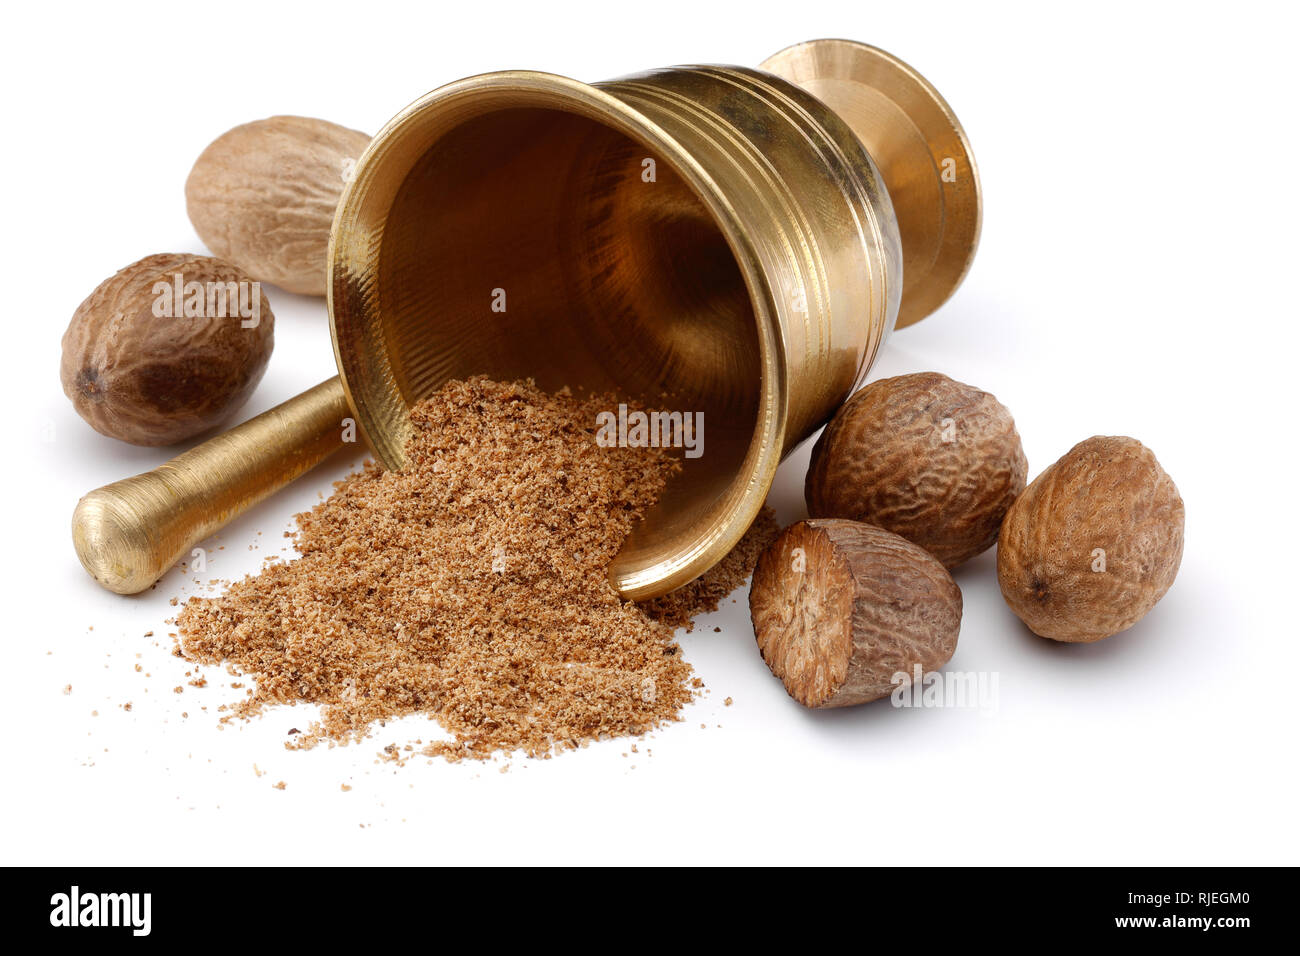 Nutmegs and nutmeg powder in bronze bowl Stock Photo